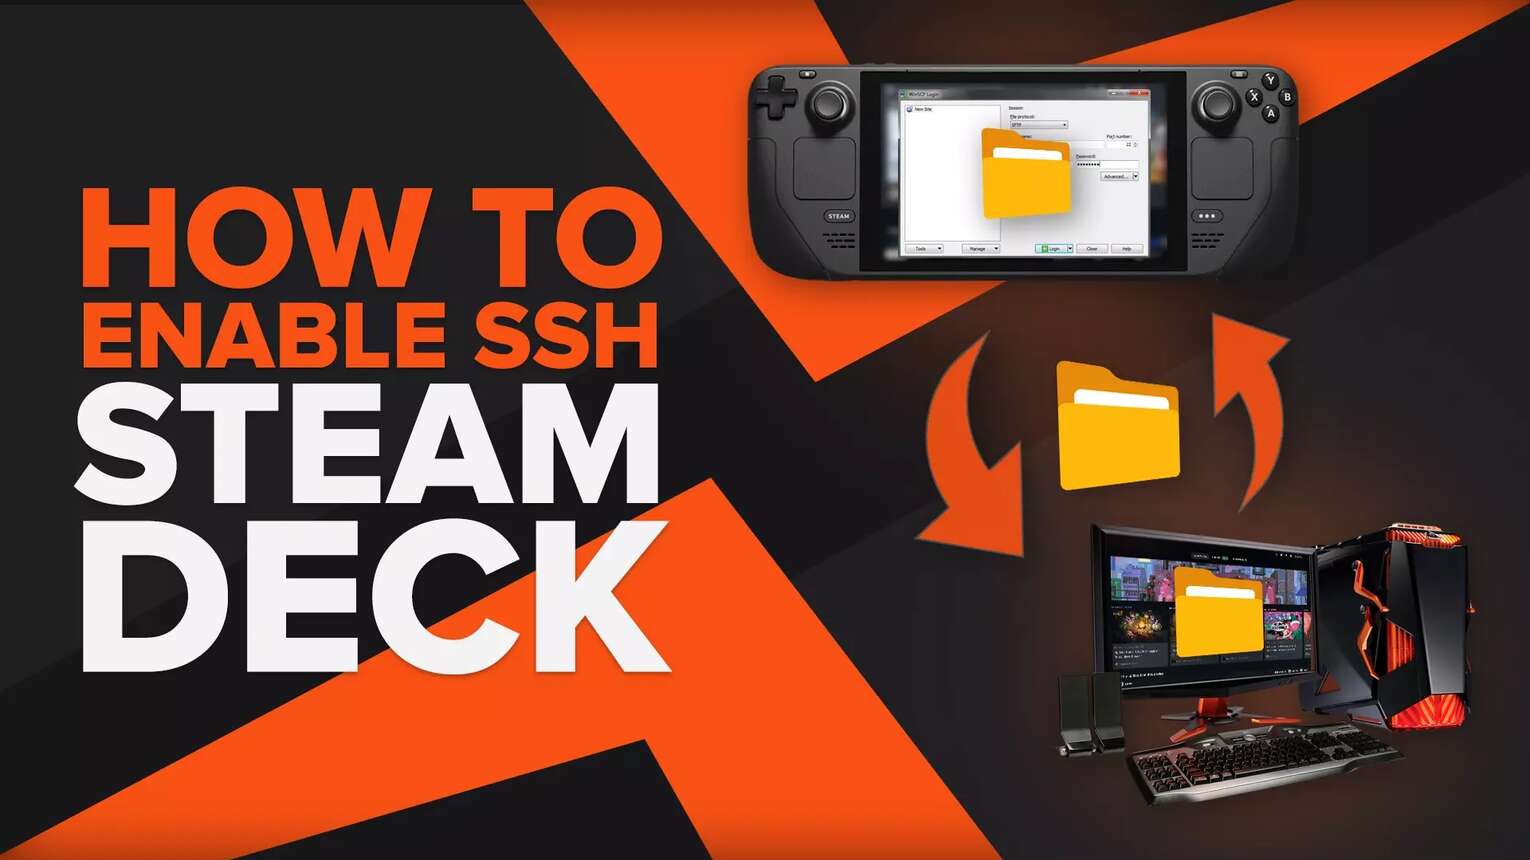 How to Quickly Enable SSH on Steam Deck [6 Steps]